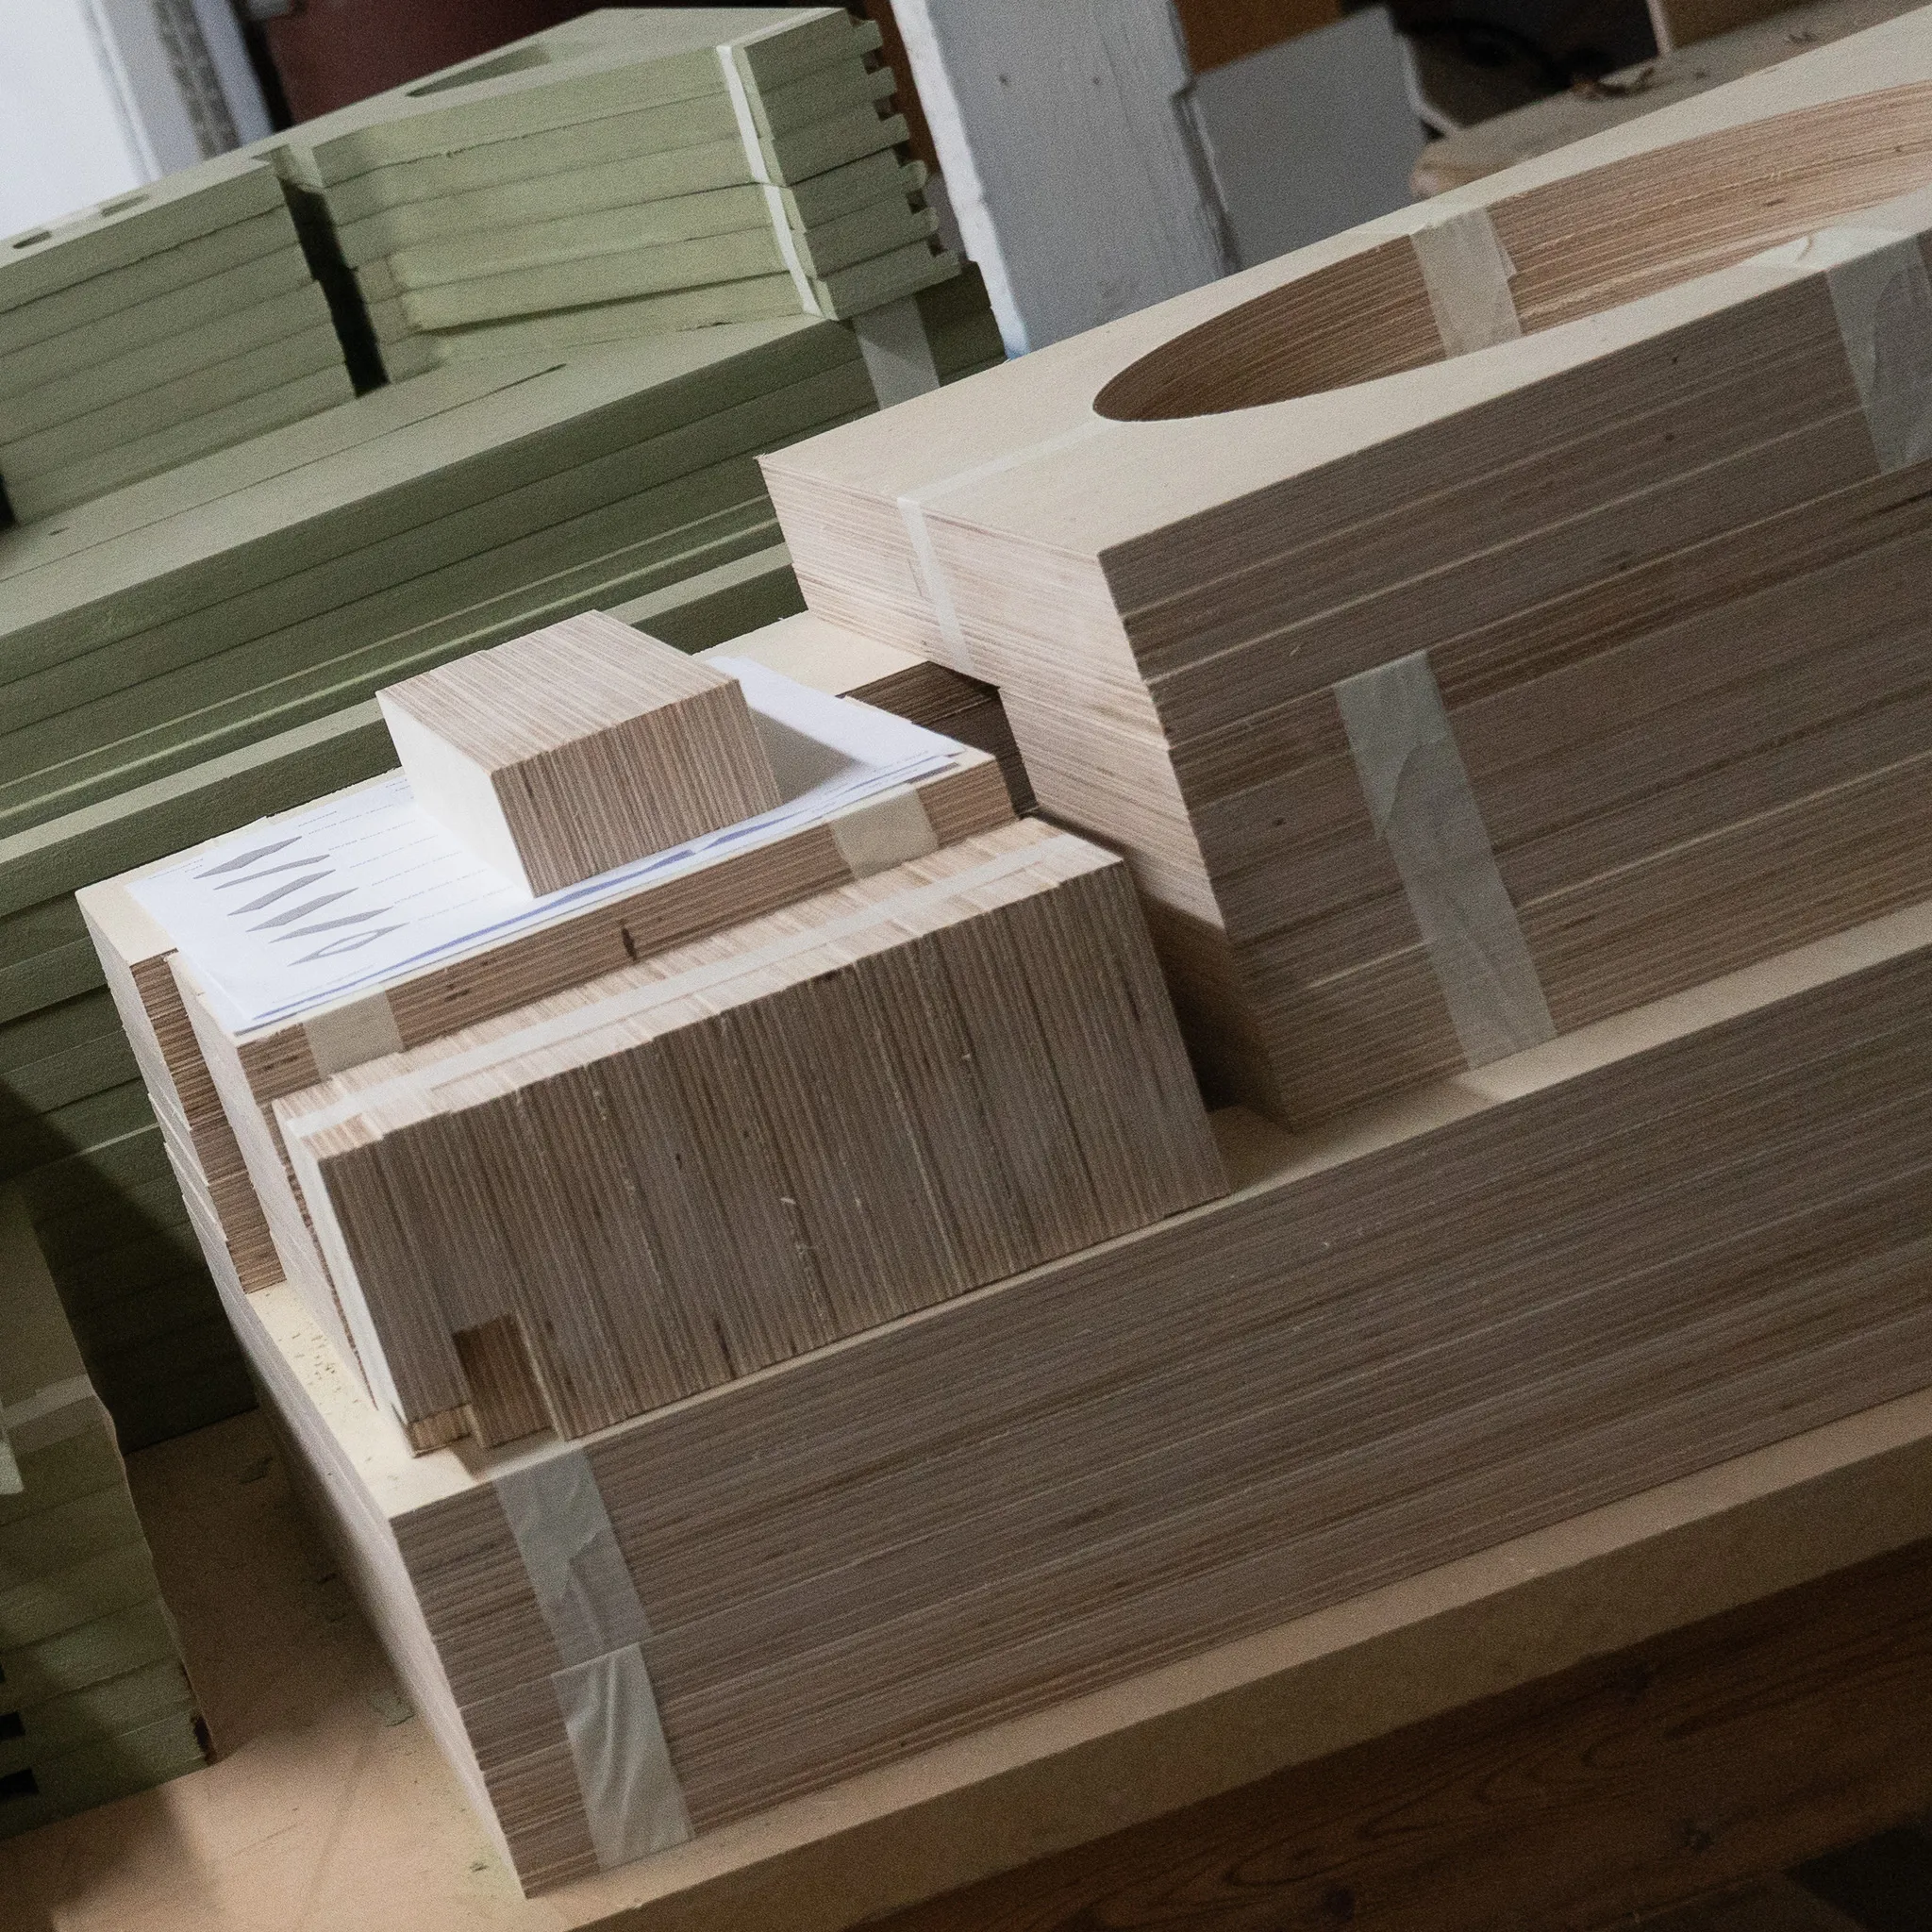 Parts we have machined from 18mm birch faced plywood